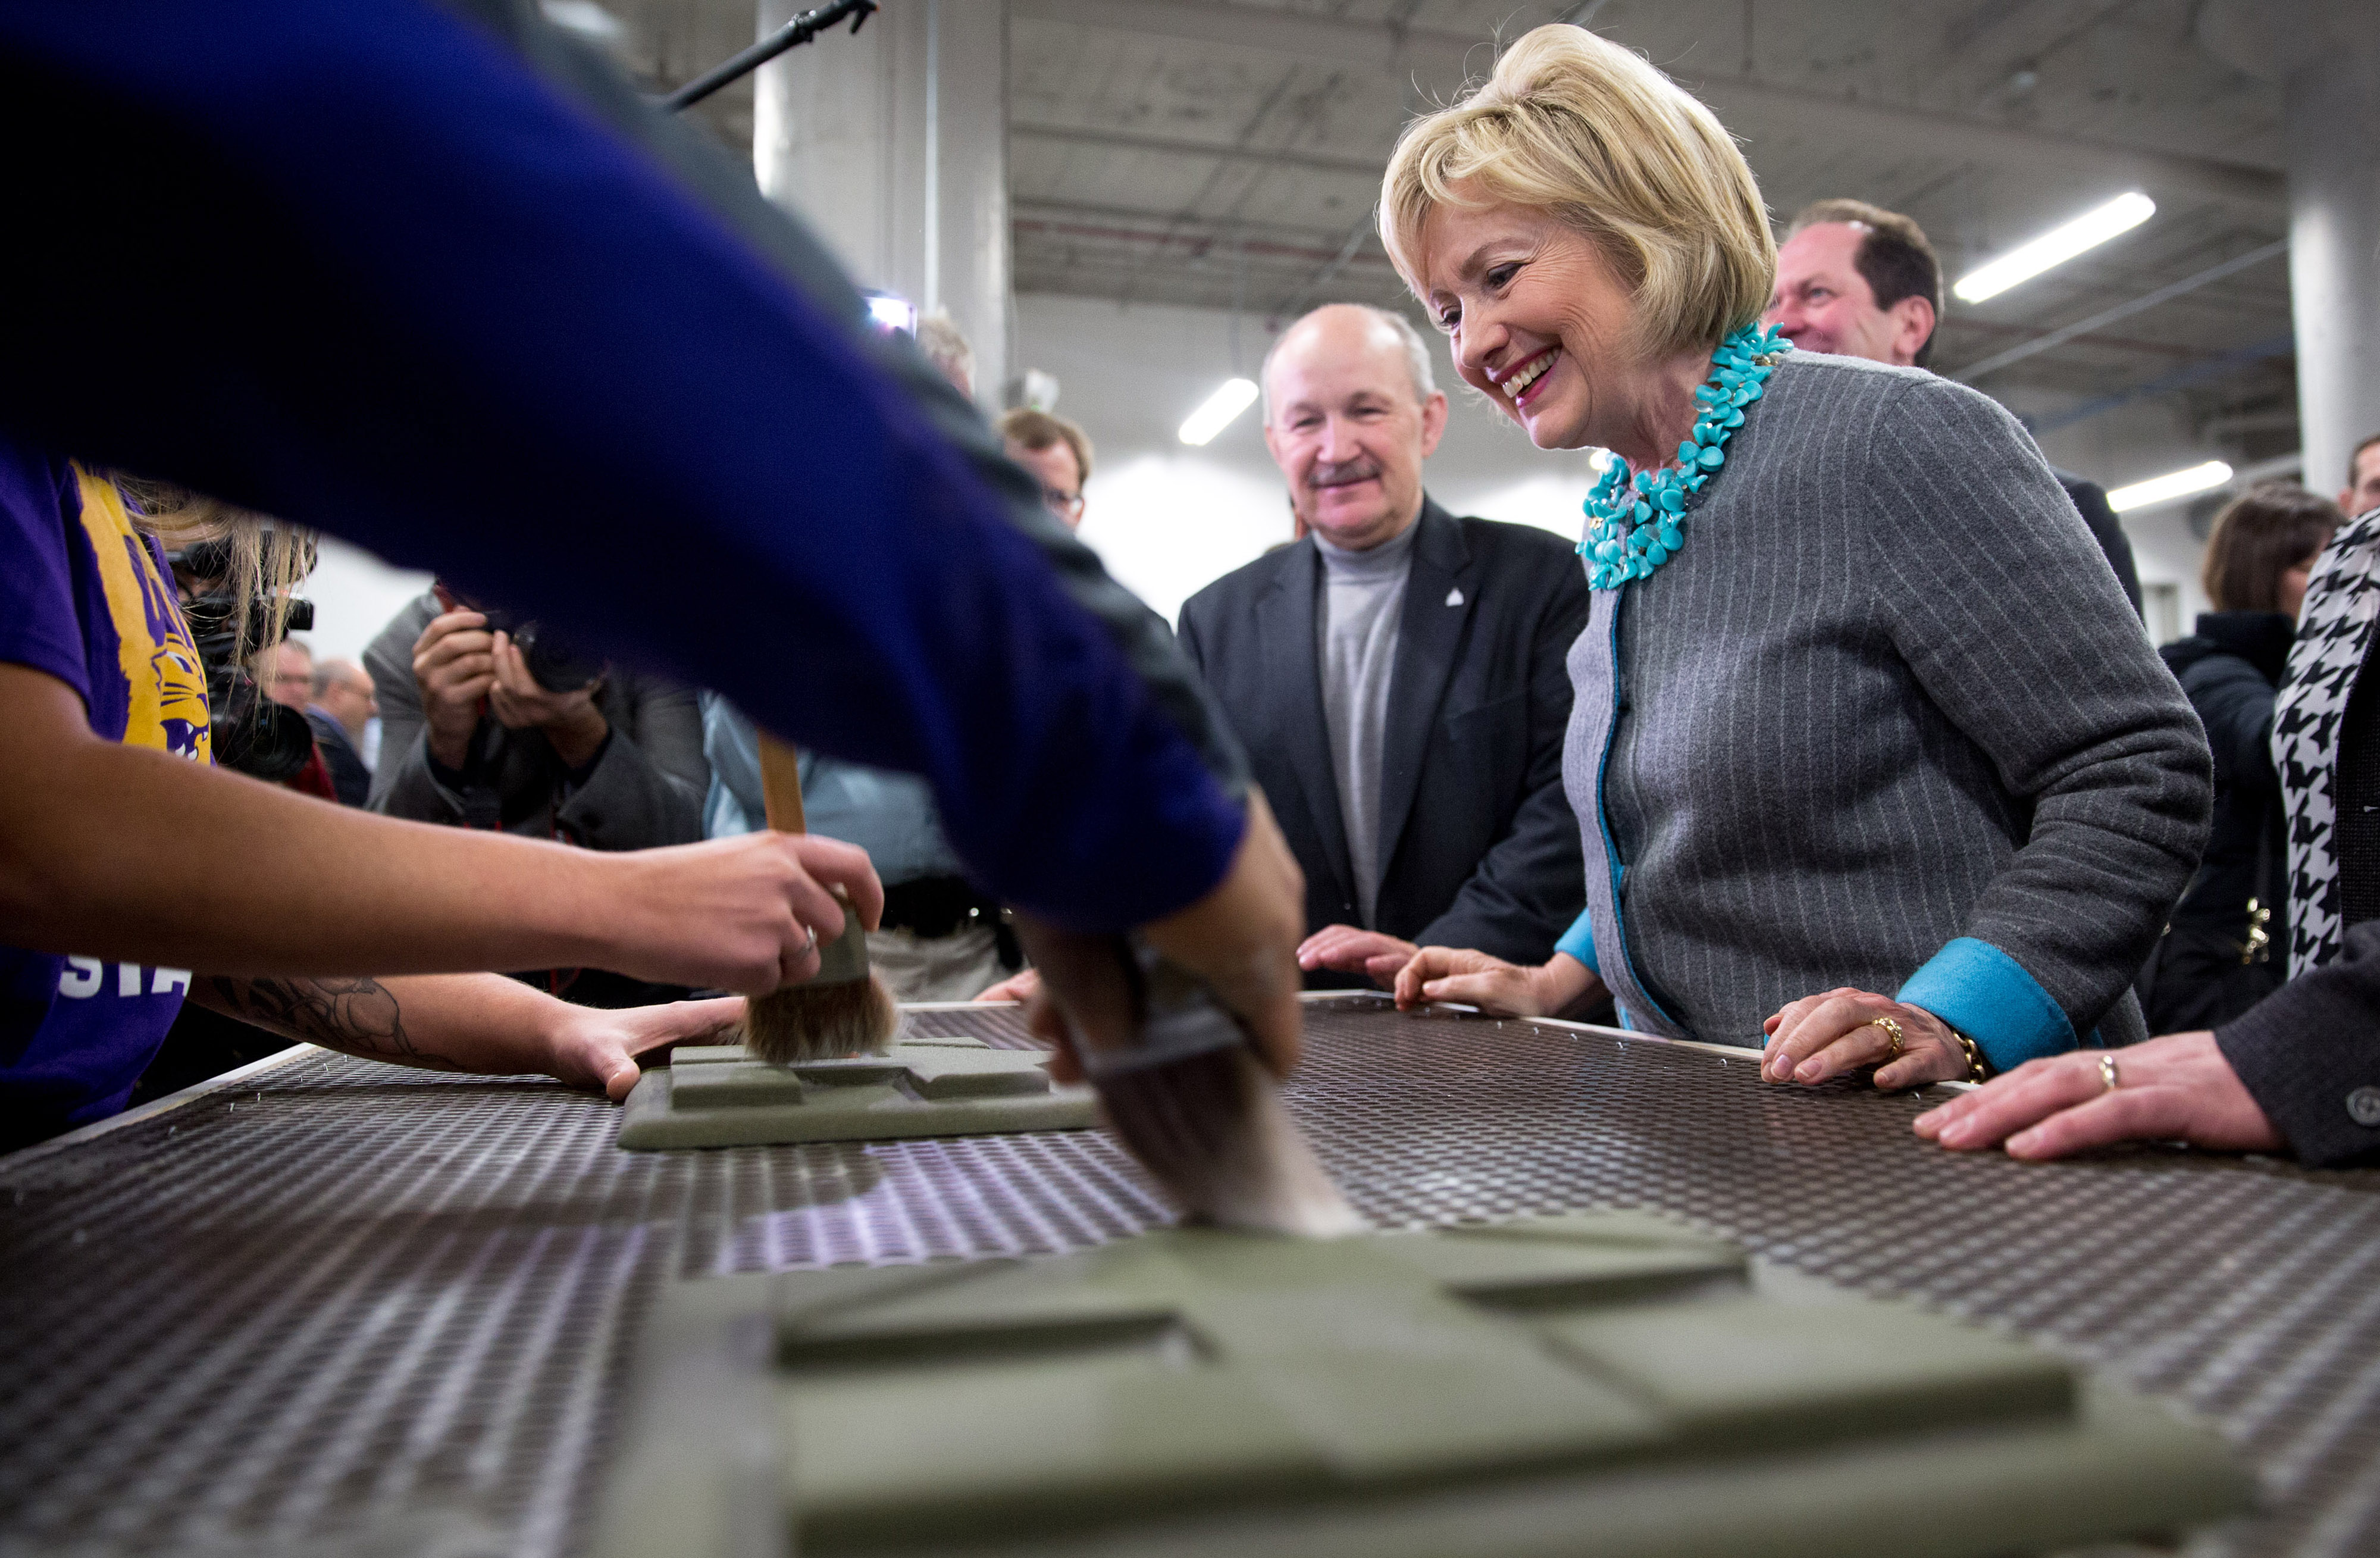 Hillary Clinton, former Secretary of State and 2016 Democratic presidential candidate, watches as students clean off 3D printed campaign logos made for her during a tour of the University of Northern Iowa's Additive Manufacturing Center at Cedar Valley TechWorks in Waterloo, Iowa, U.S., on Wednesday, Dec. 9, 2015. (Bloomberg&mdash;Bloomberg via Getty Images)